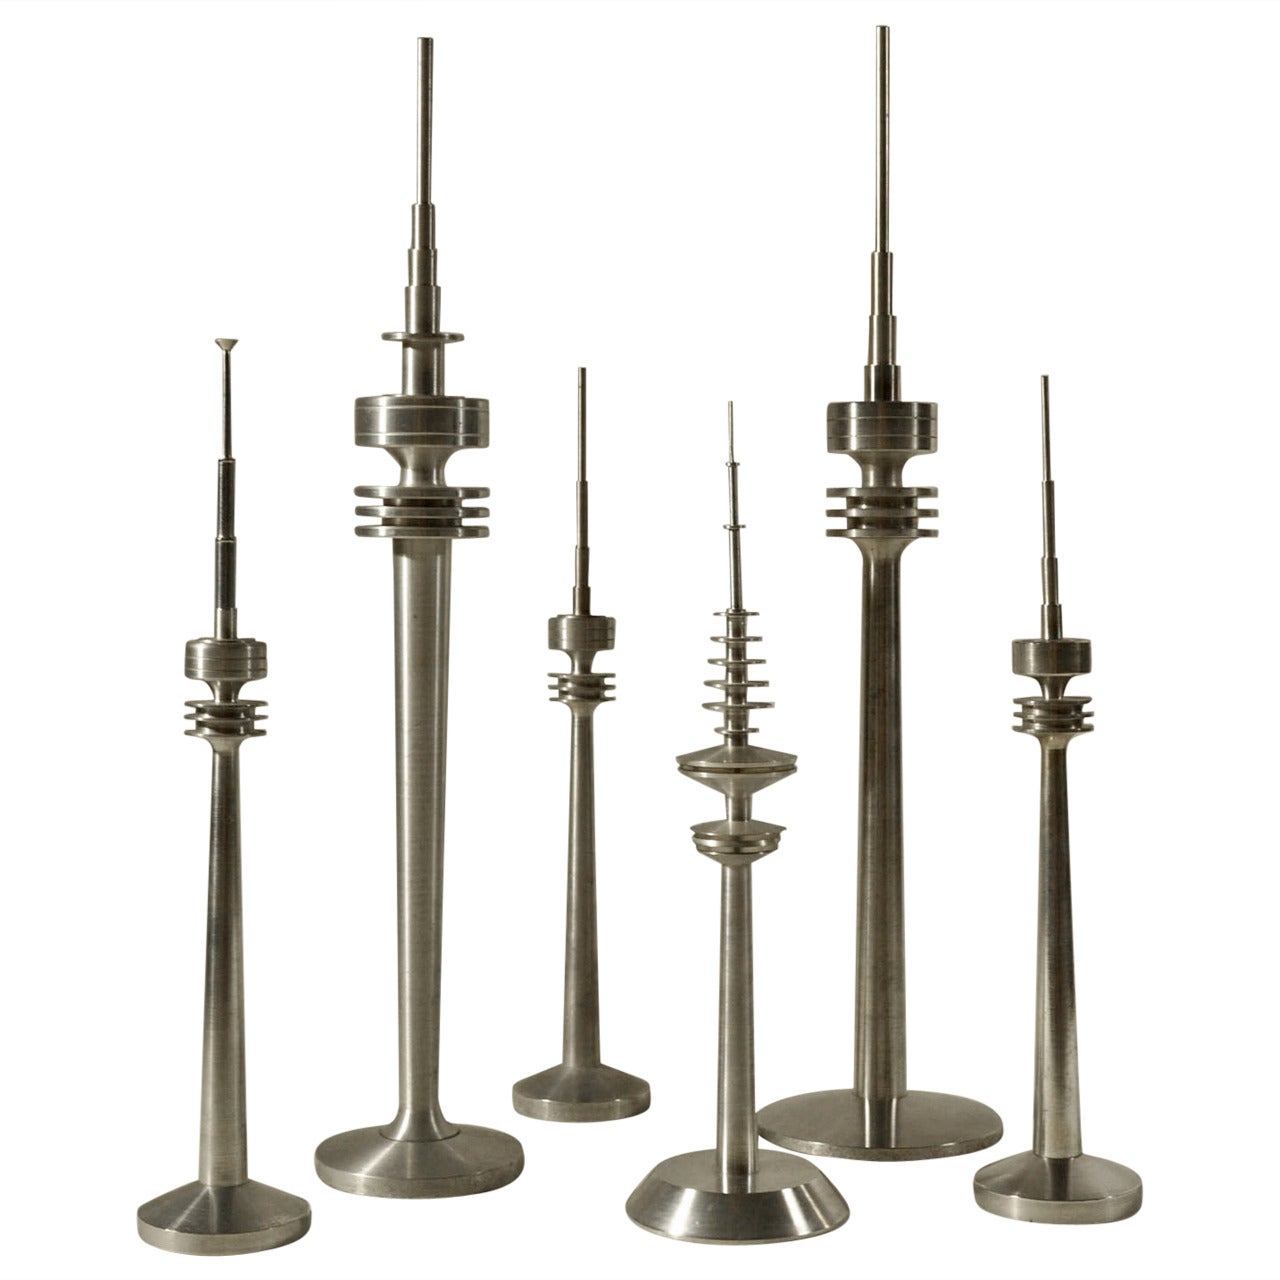 Group of Television Tower Models